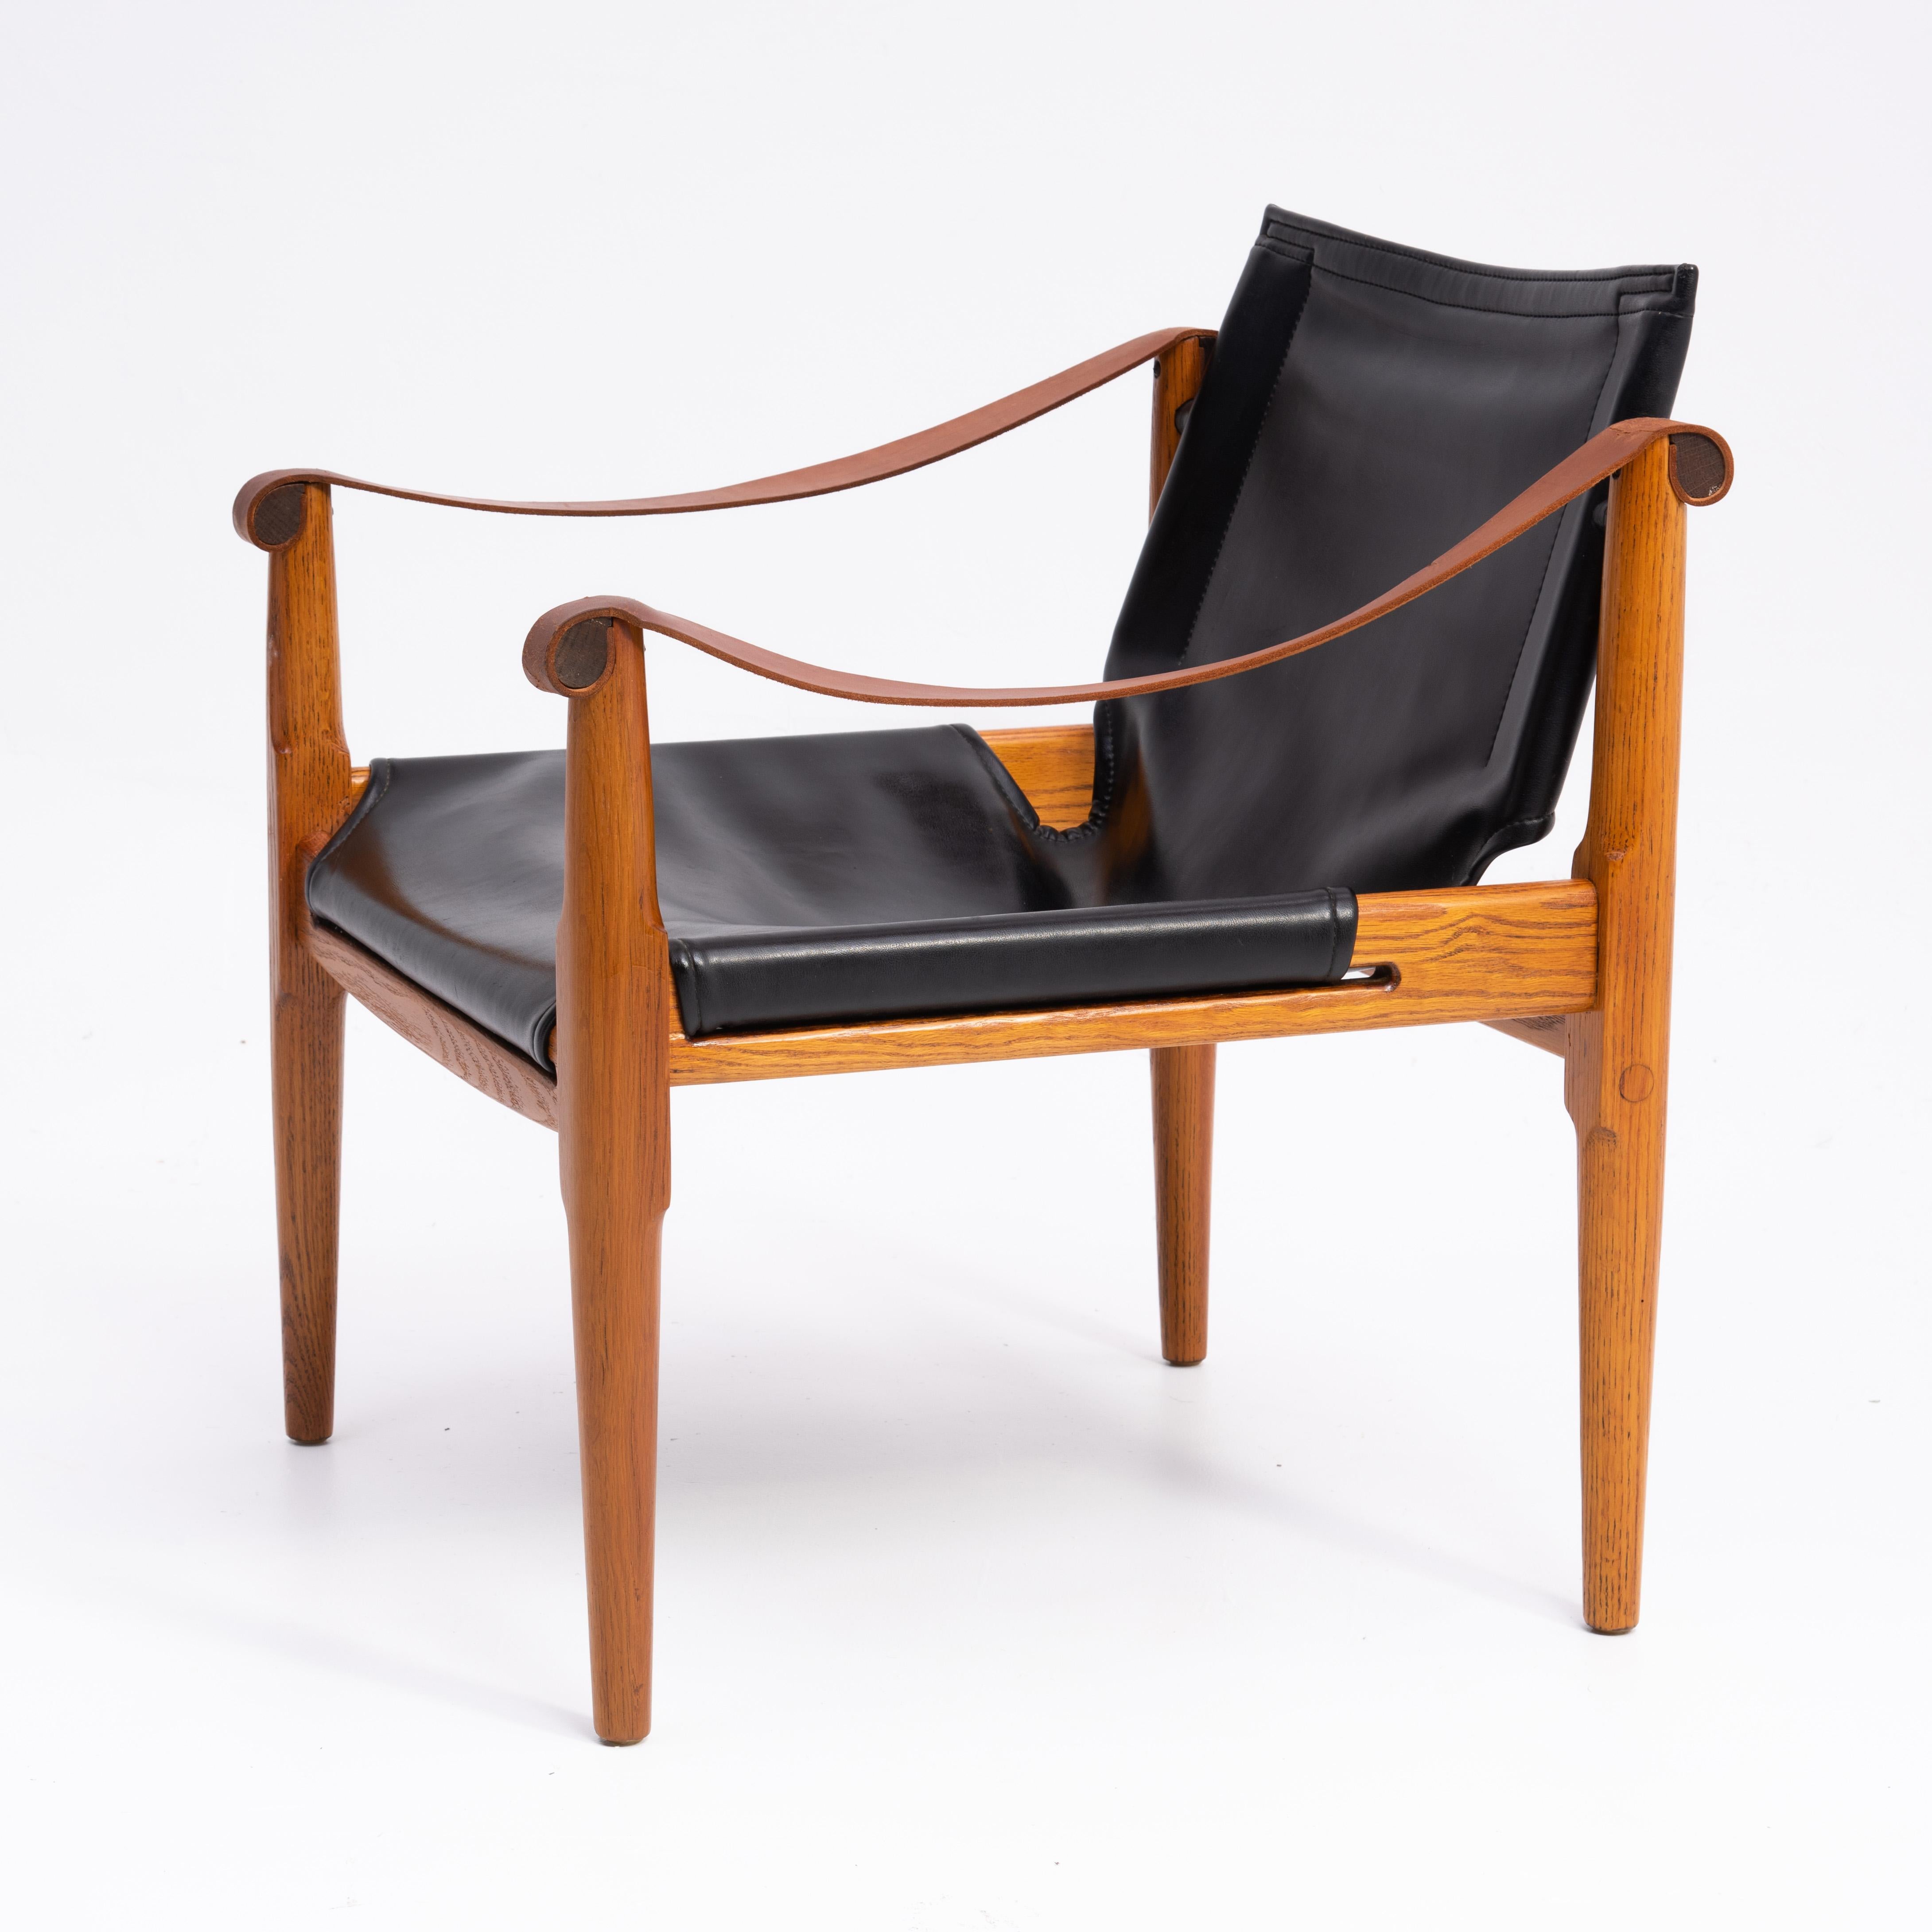 A vintage Mid-Century Modern brown Saltman safari chair designed by Douglas Heaslett. Solid oak frame with black vinyl seat and brown leather arms.